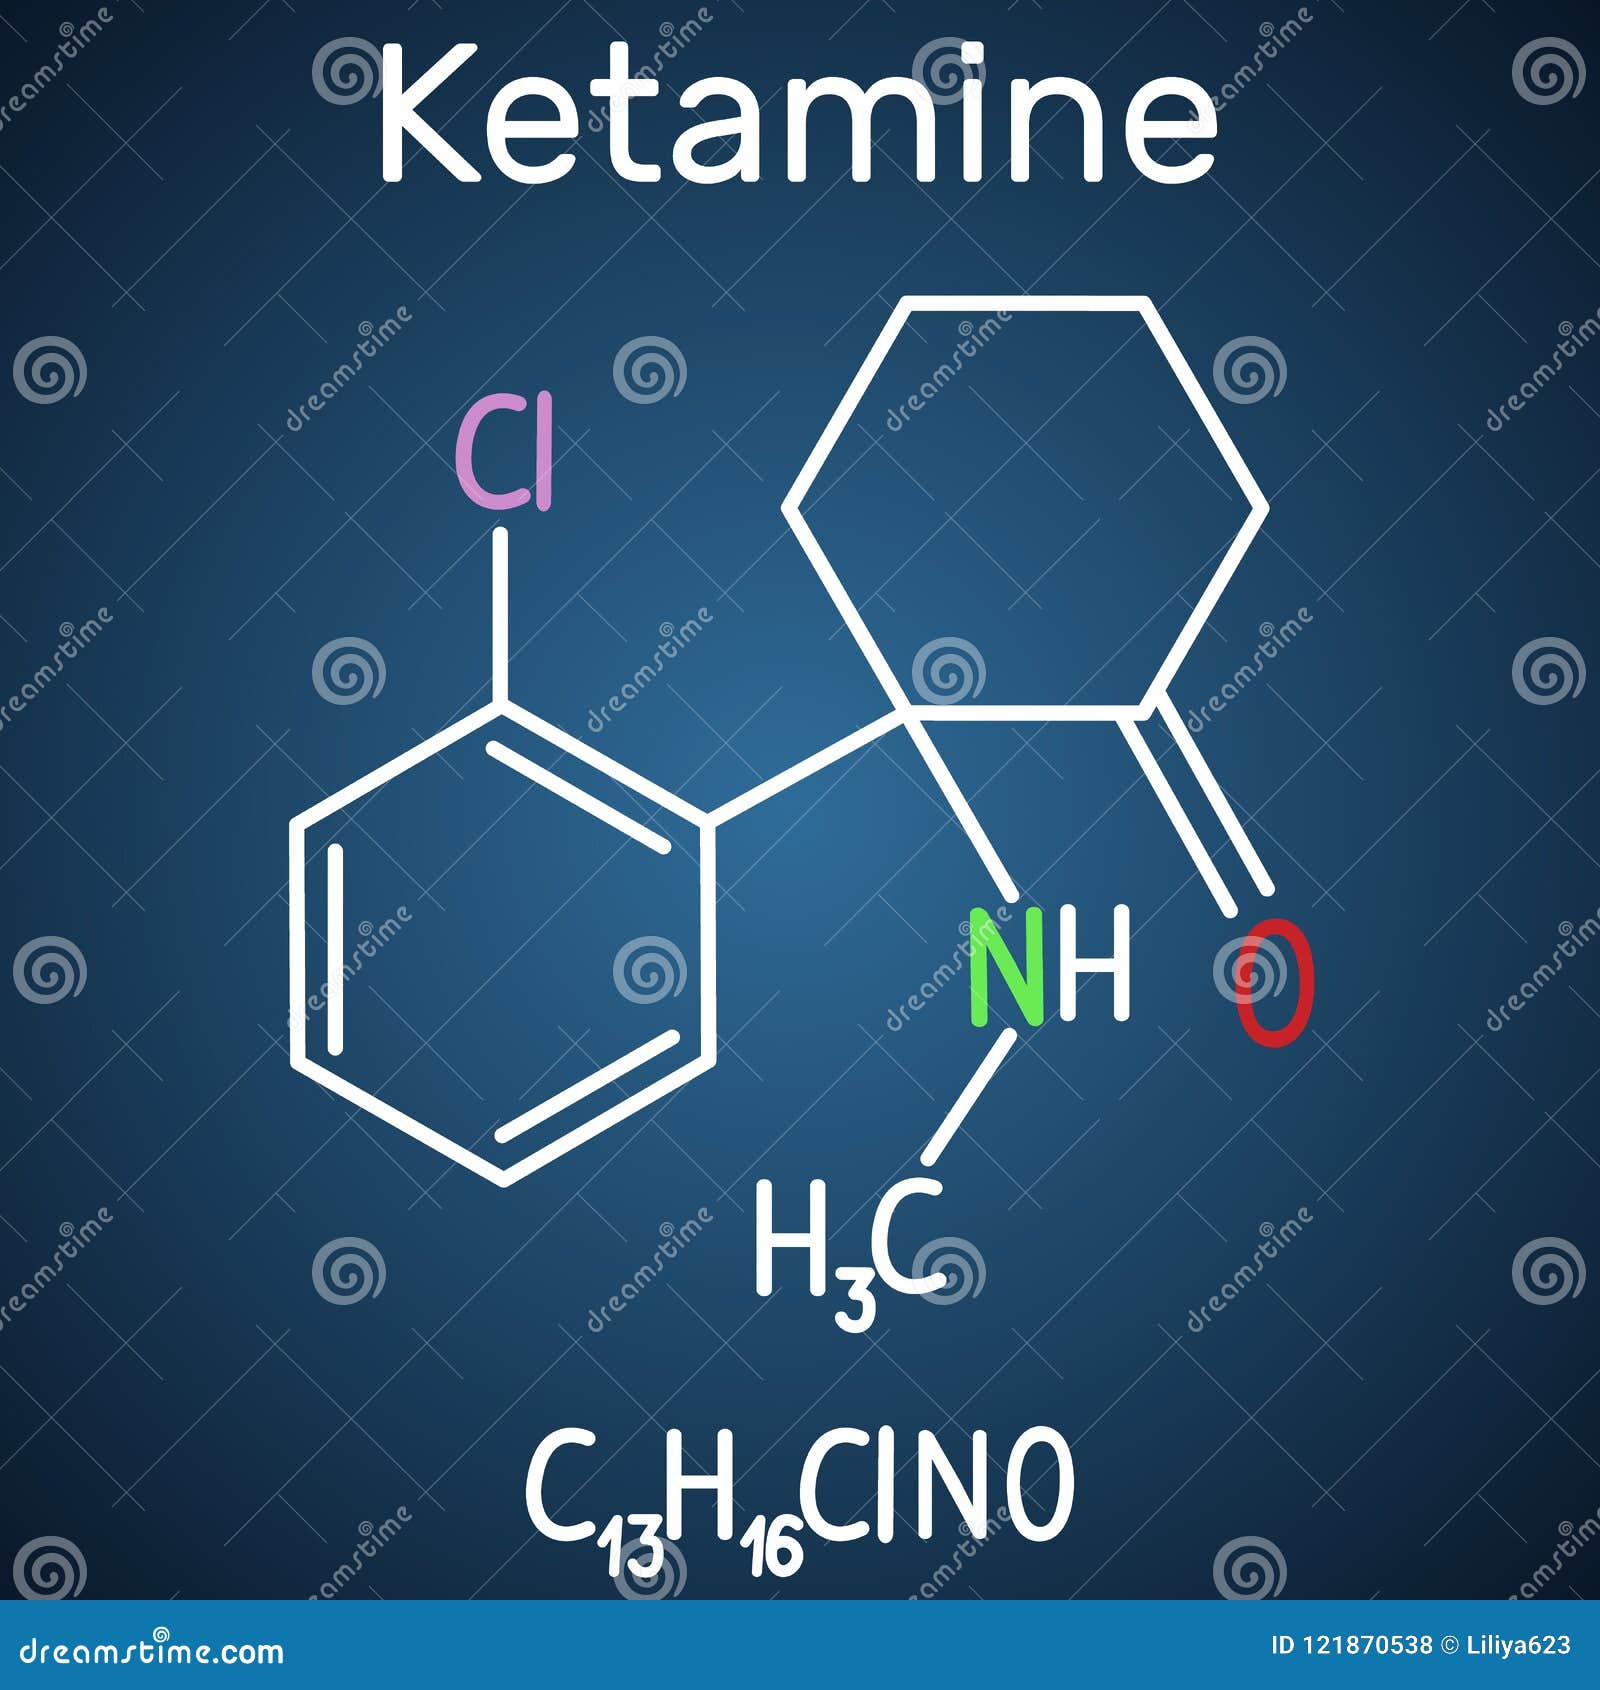 Ketamine molecule. It is used for anesthesia in medicine. Structural chemical formula and molecule model on the dark blue